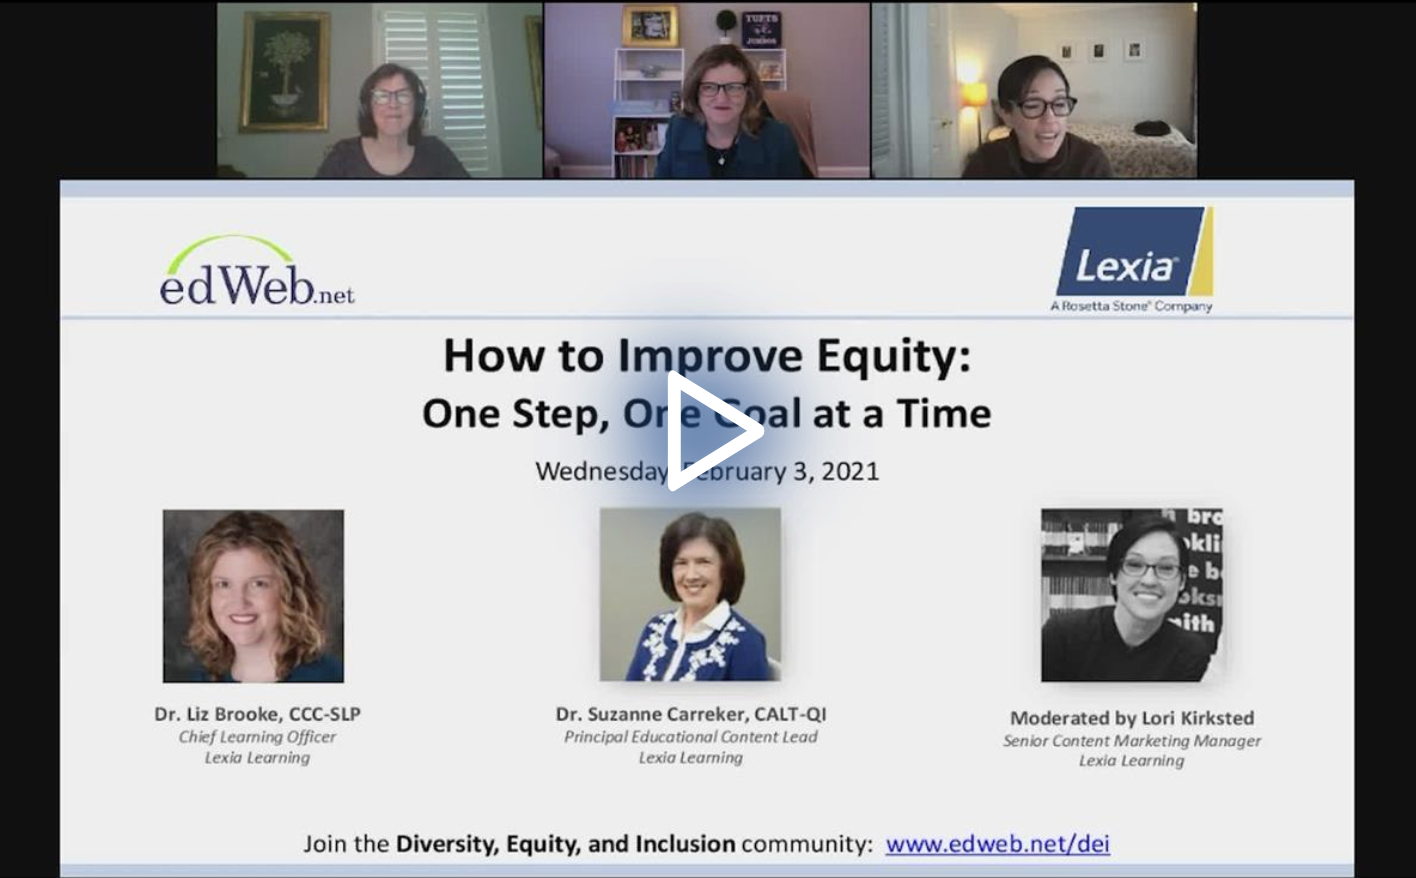 How to Improve Equity: One Step, One Goal at a Time screenshot of the presenters and presentation title slide